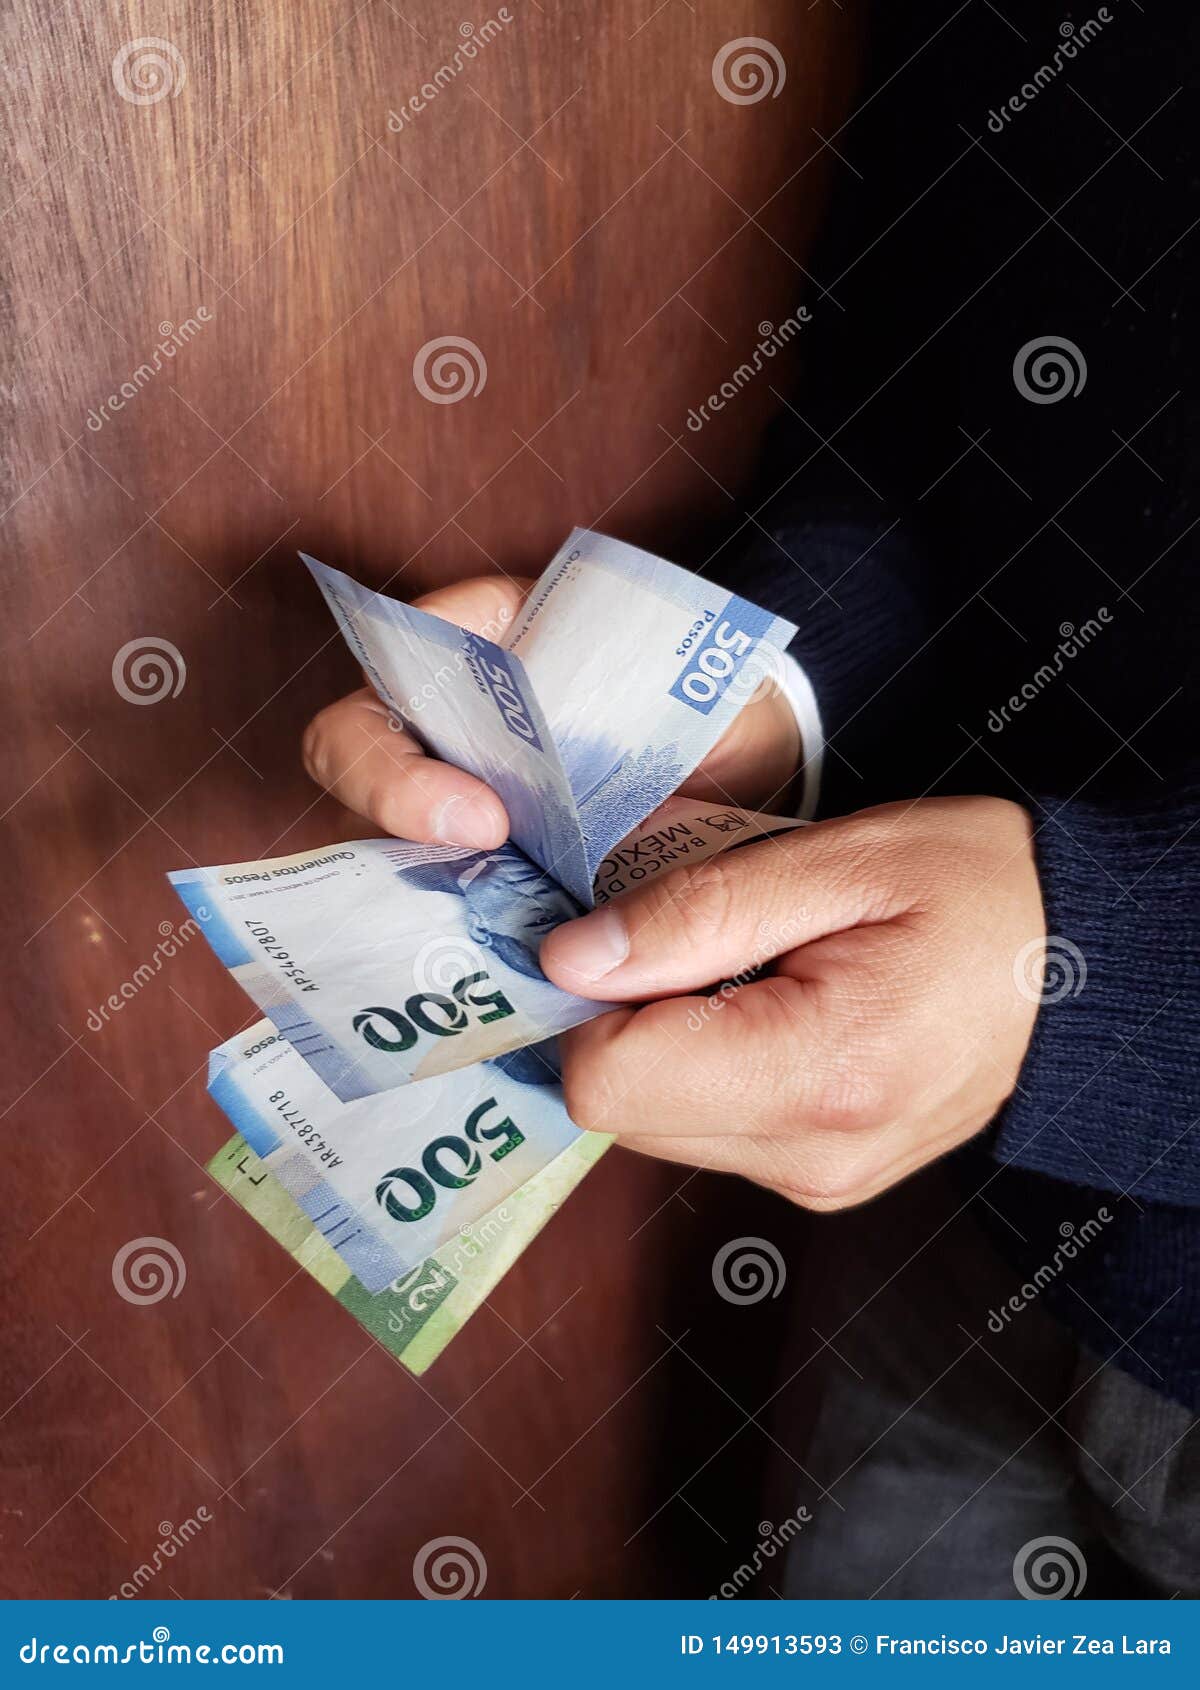 hands of a man counting mexican banknotes